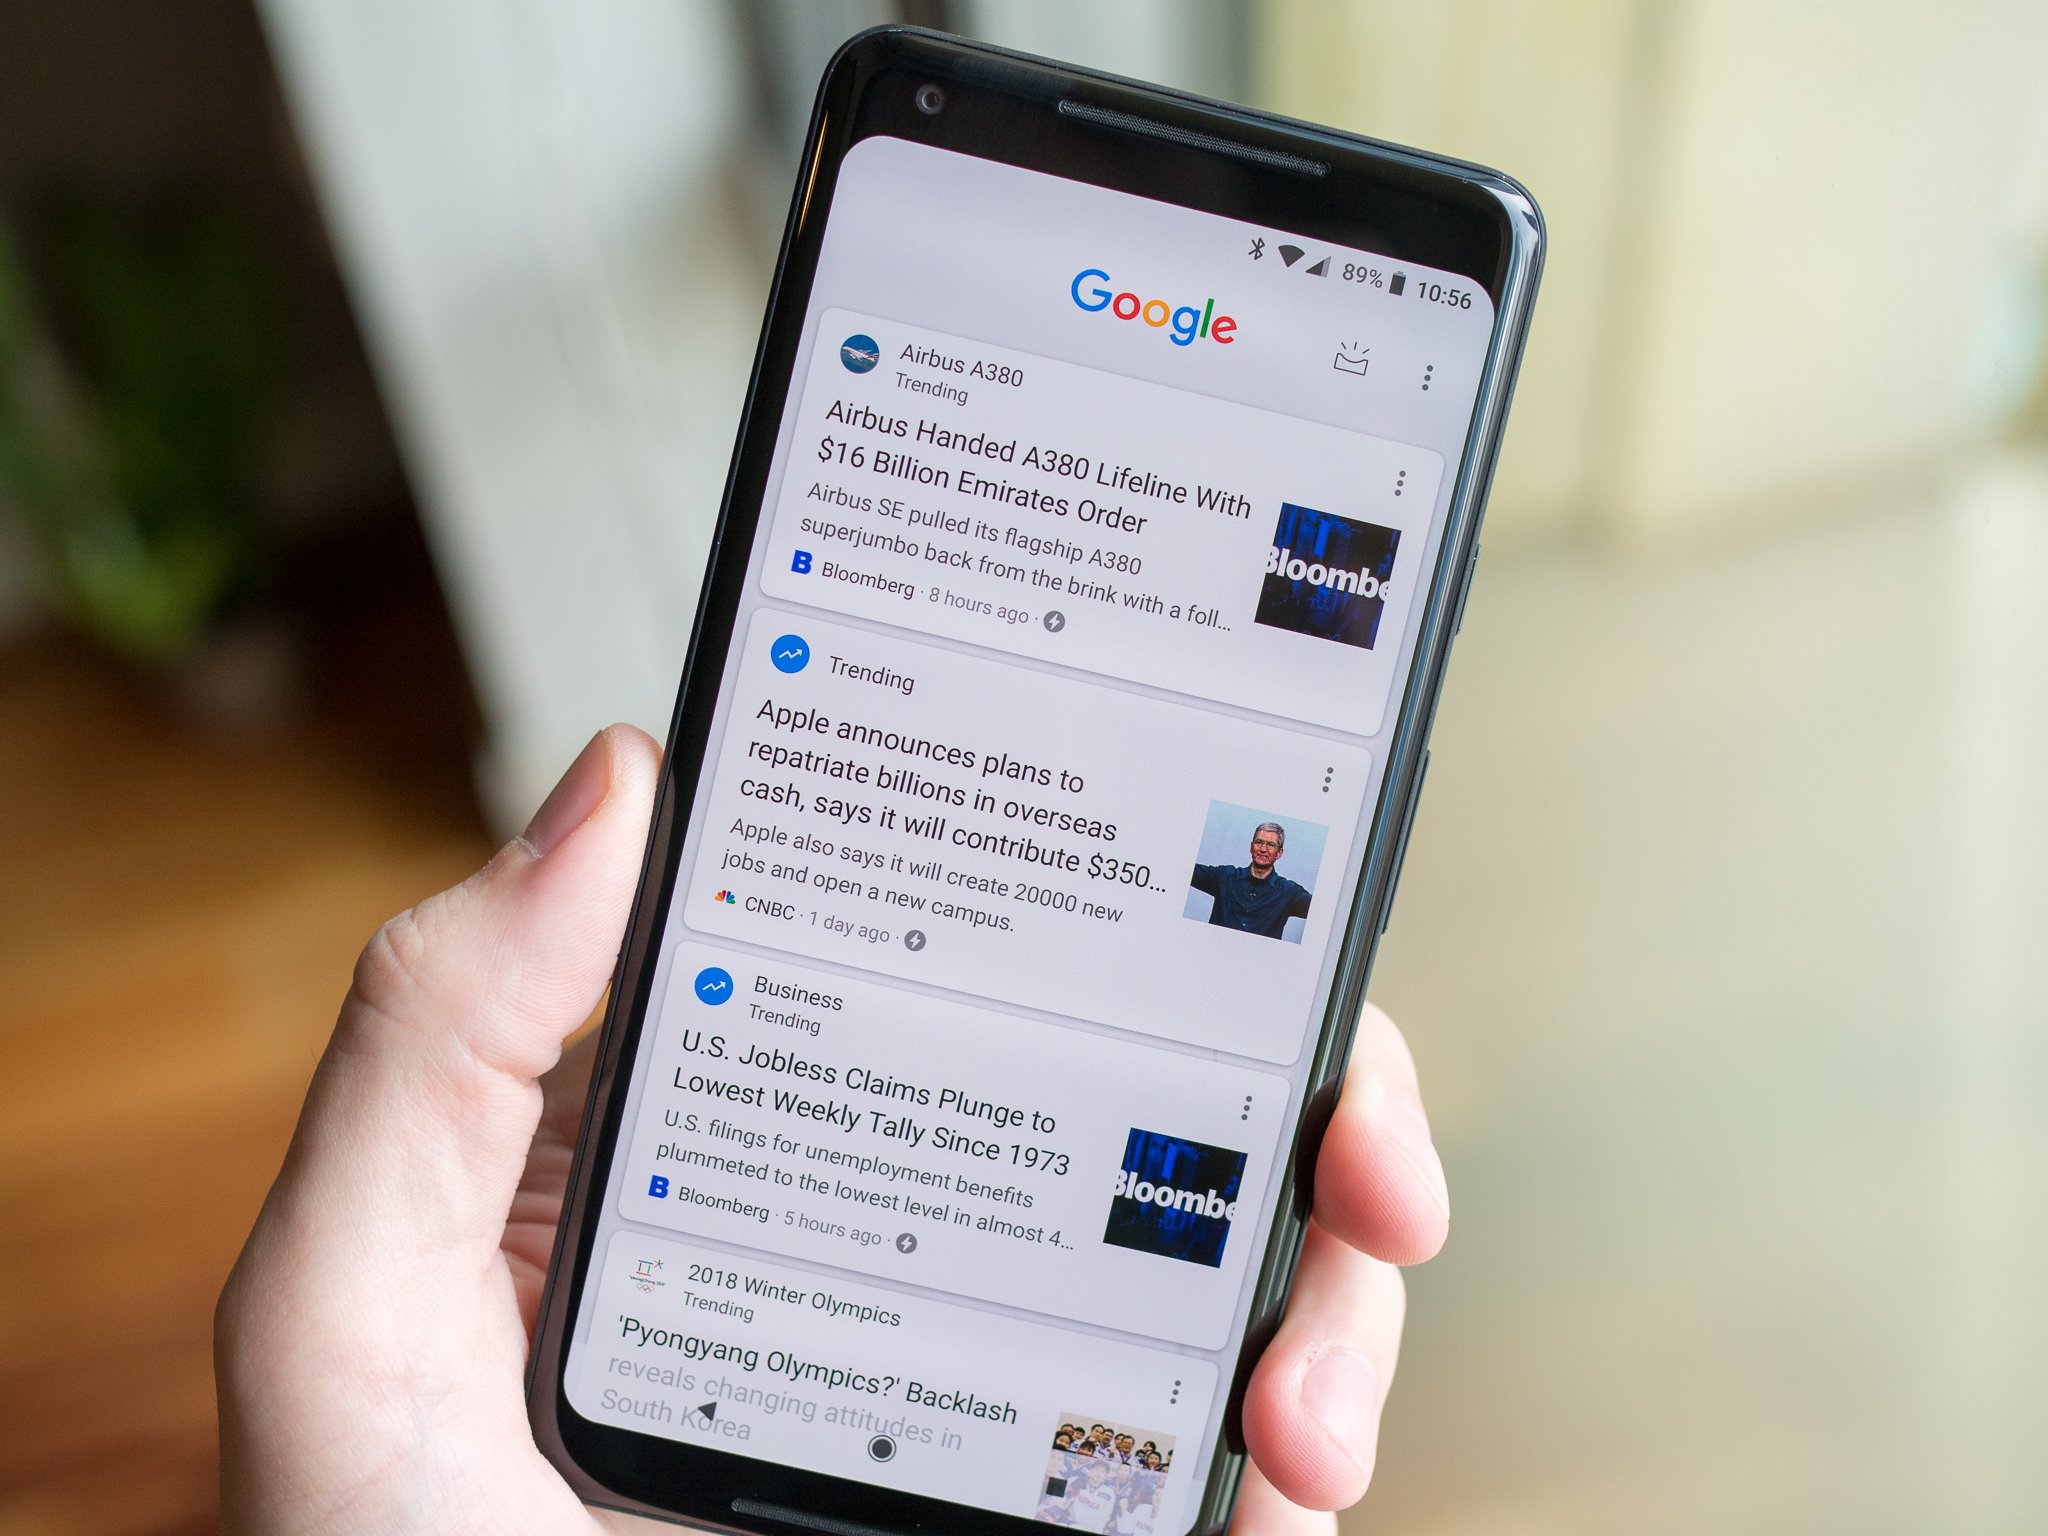 Google Now feed on the Pixel 2 XL